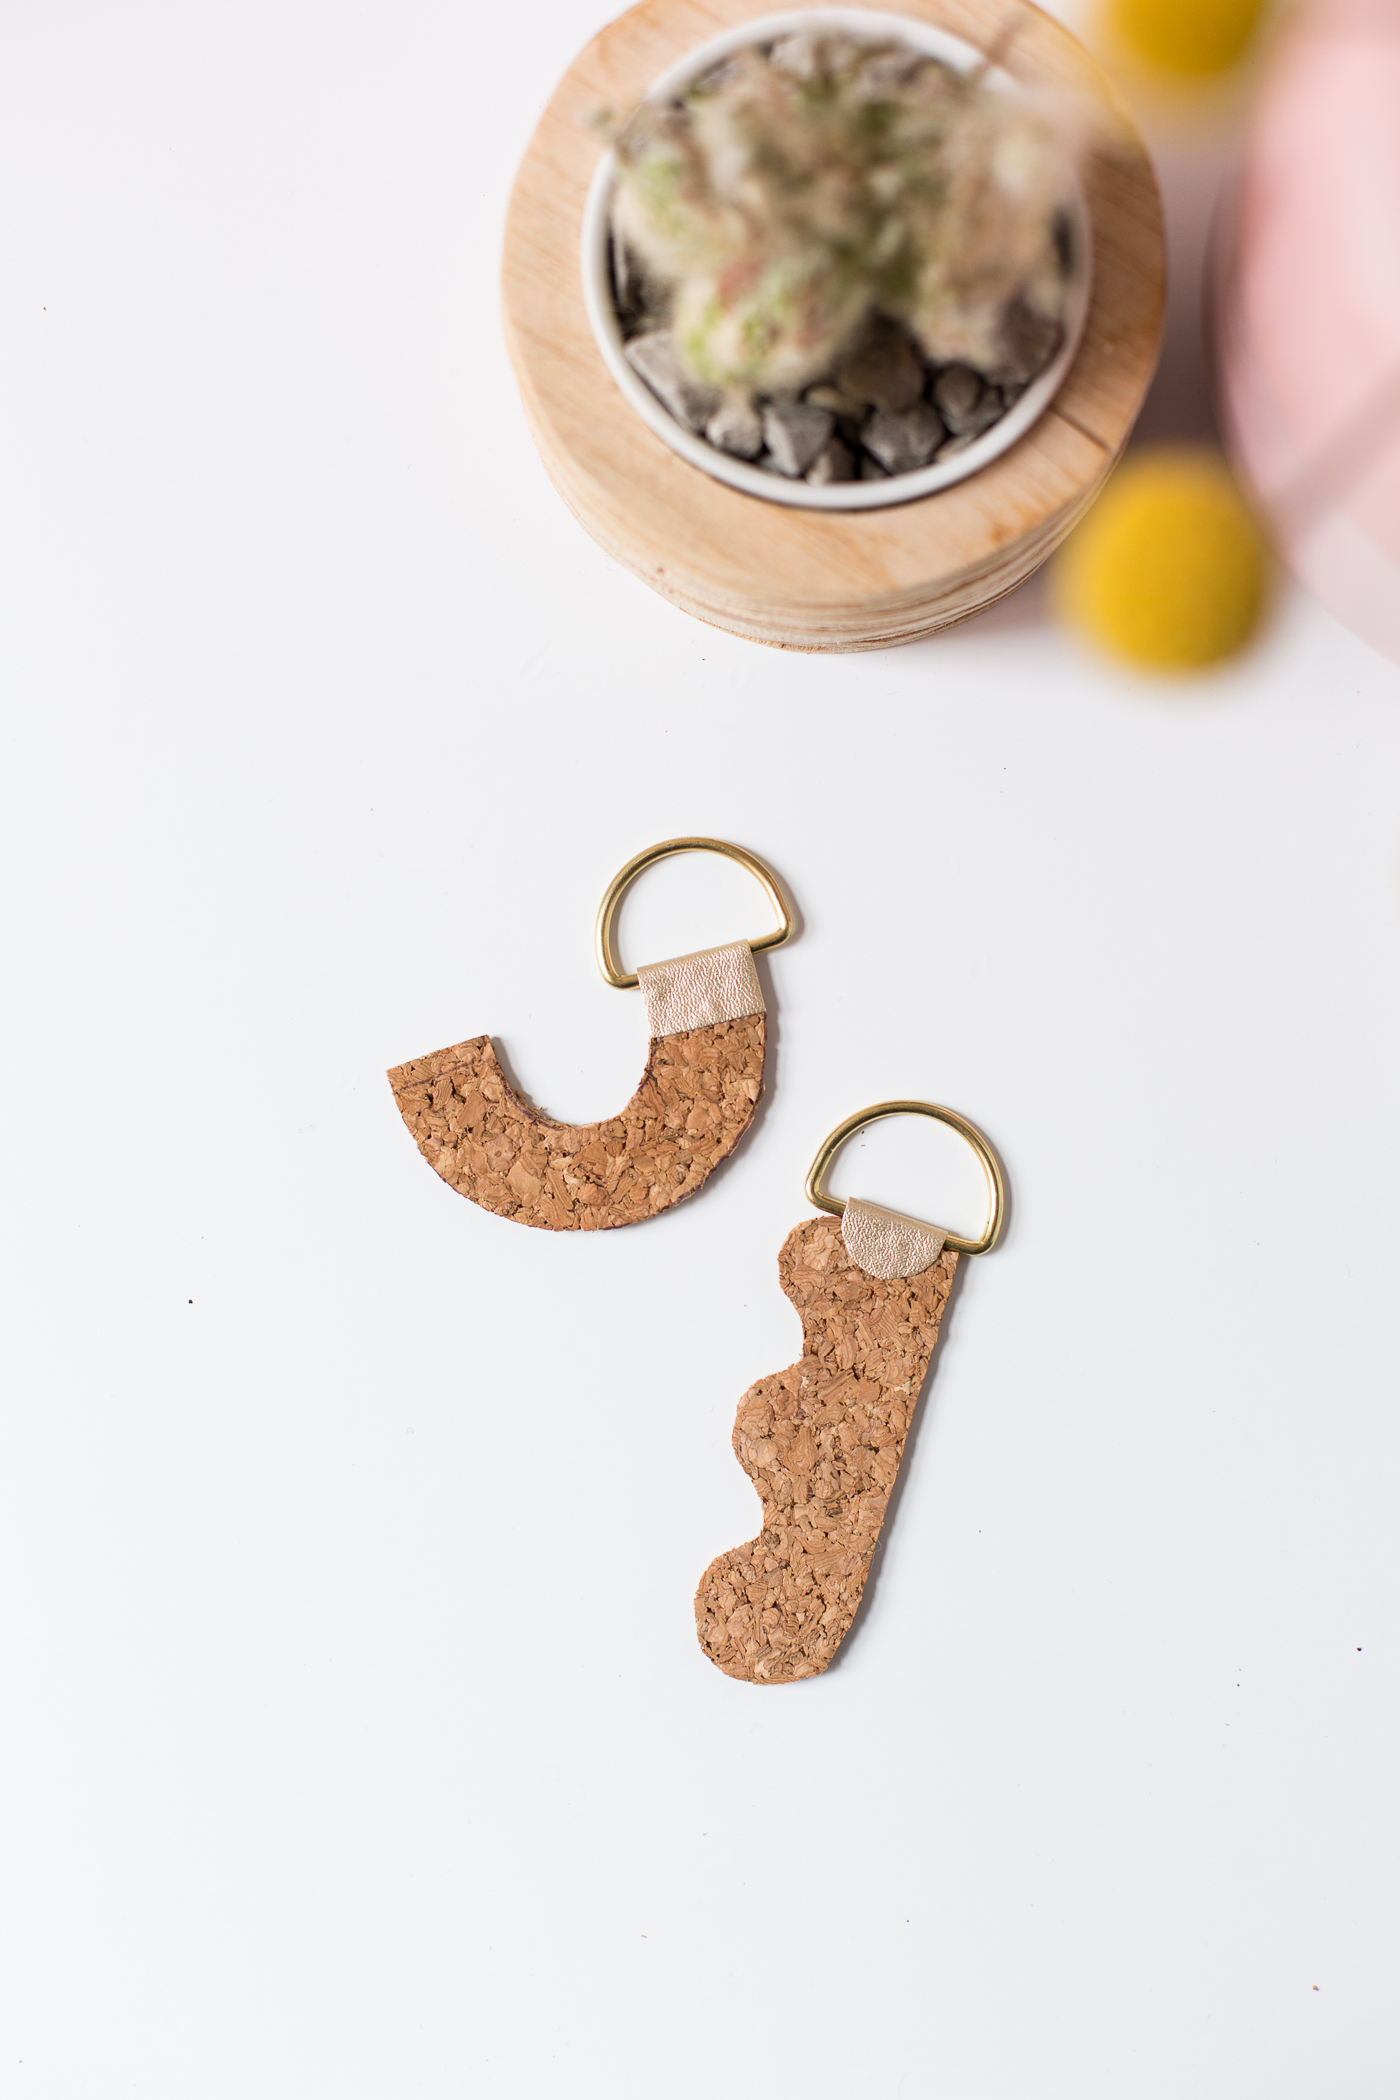 Curate your Keychain with these DIY Contemporary Cork Keyrings | @fallfordiy